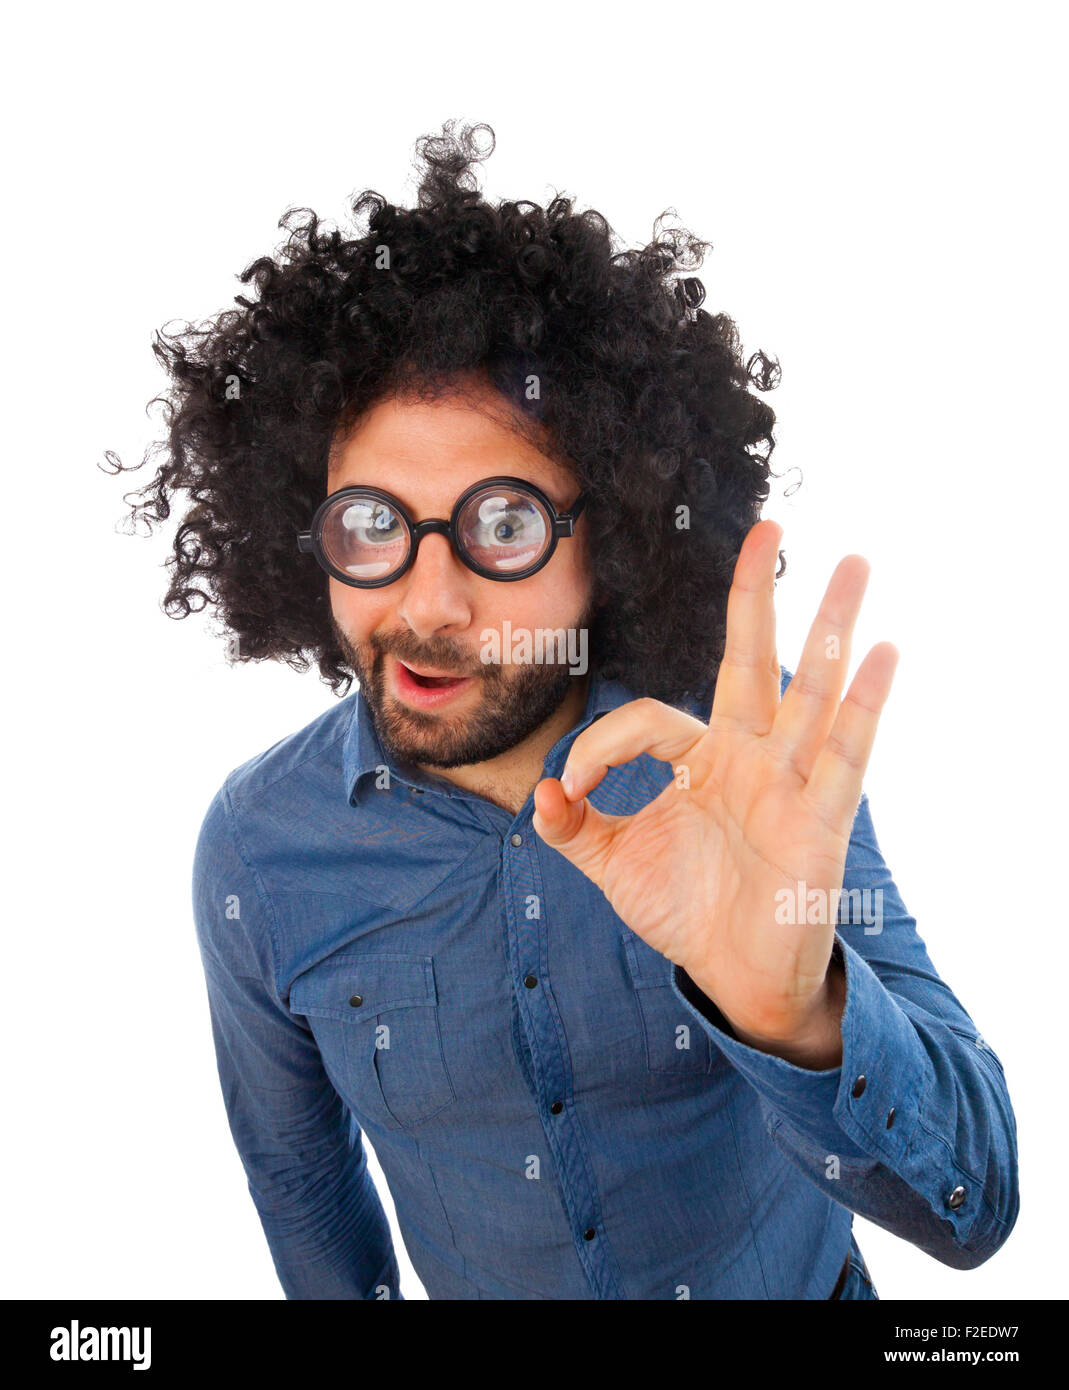 Man with crazy expression making gesture ok on white background. Stock Photo